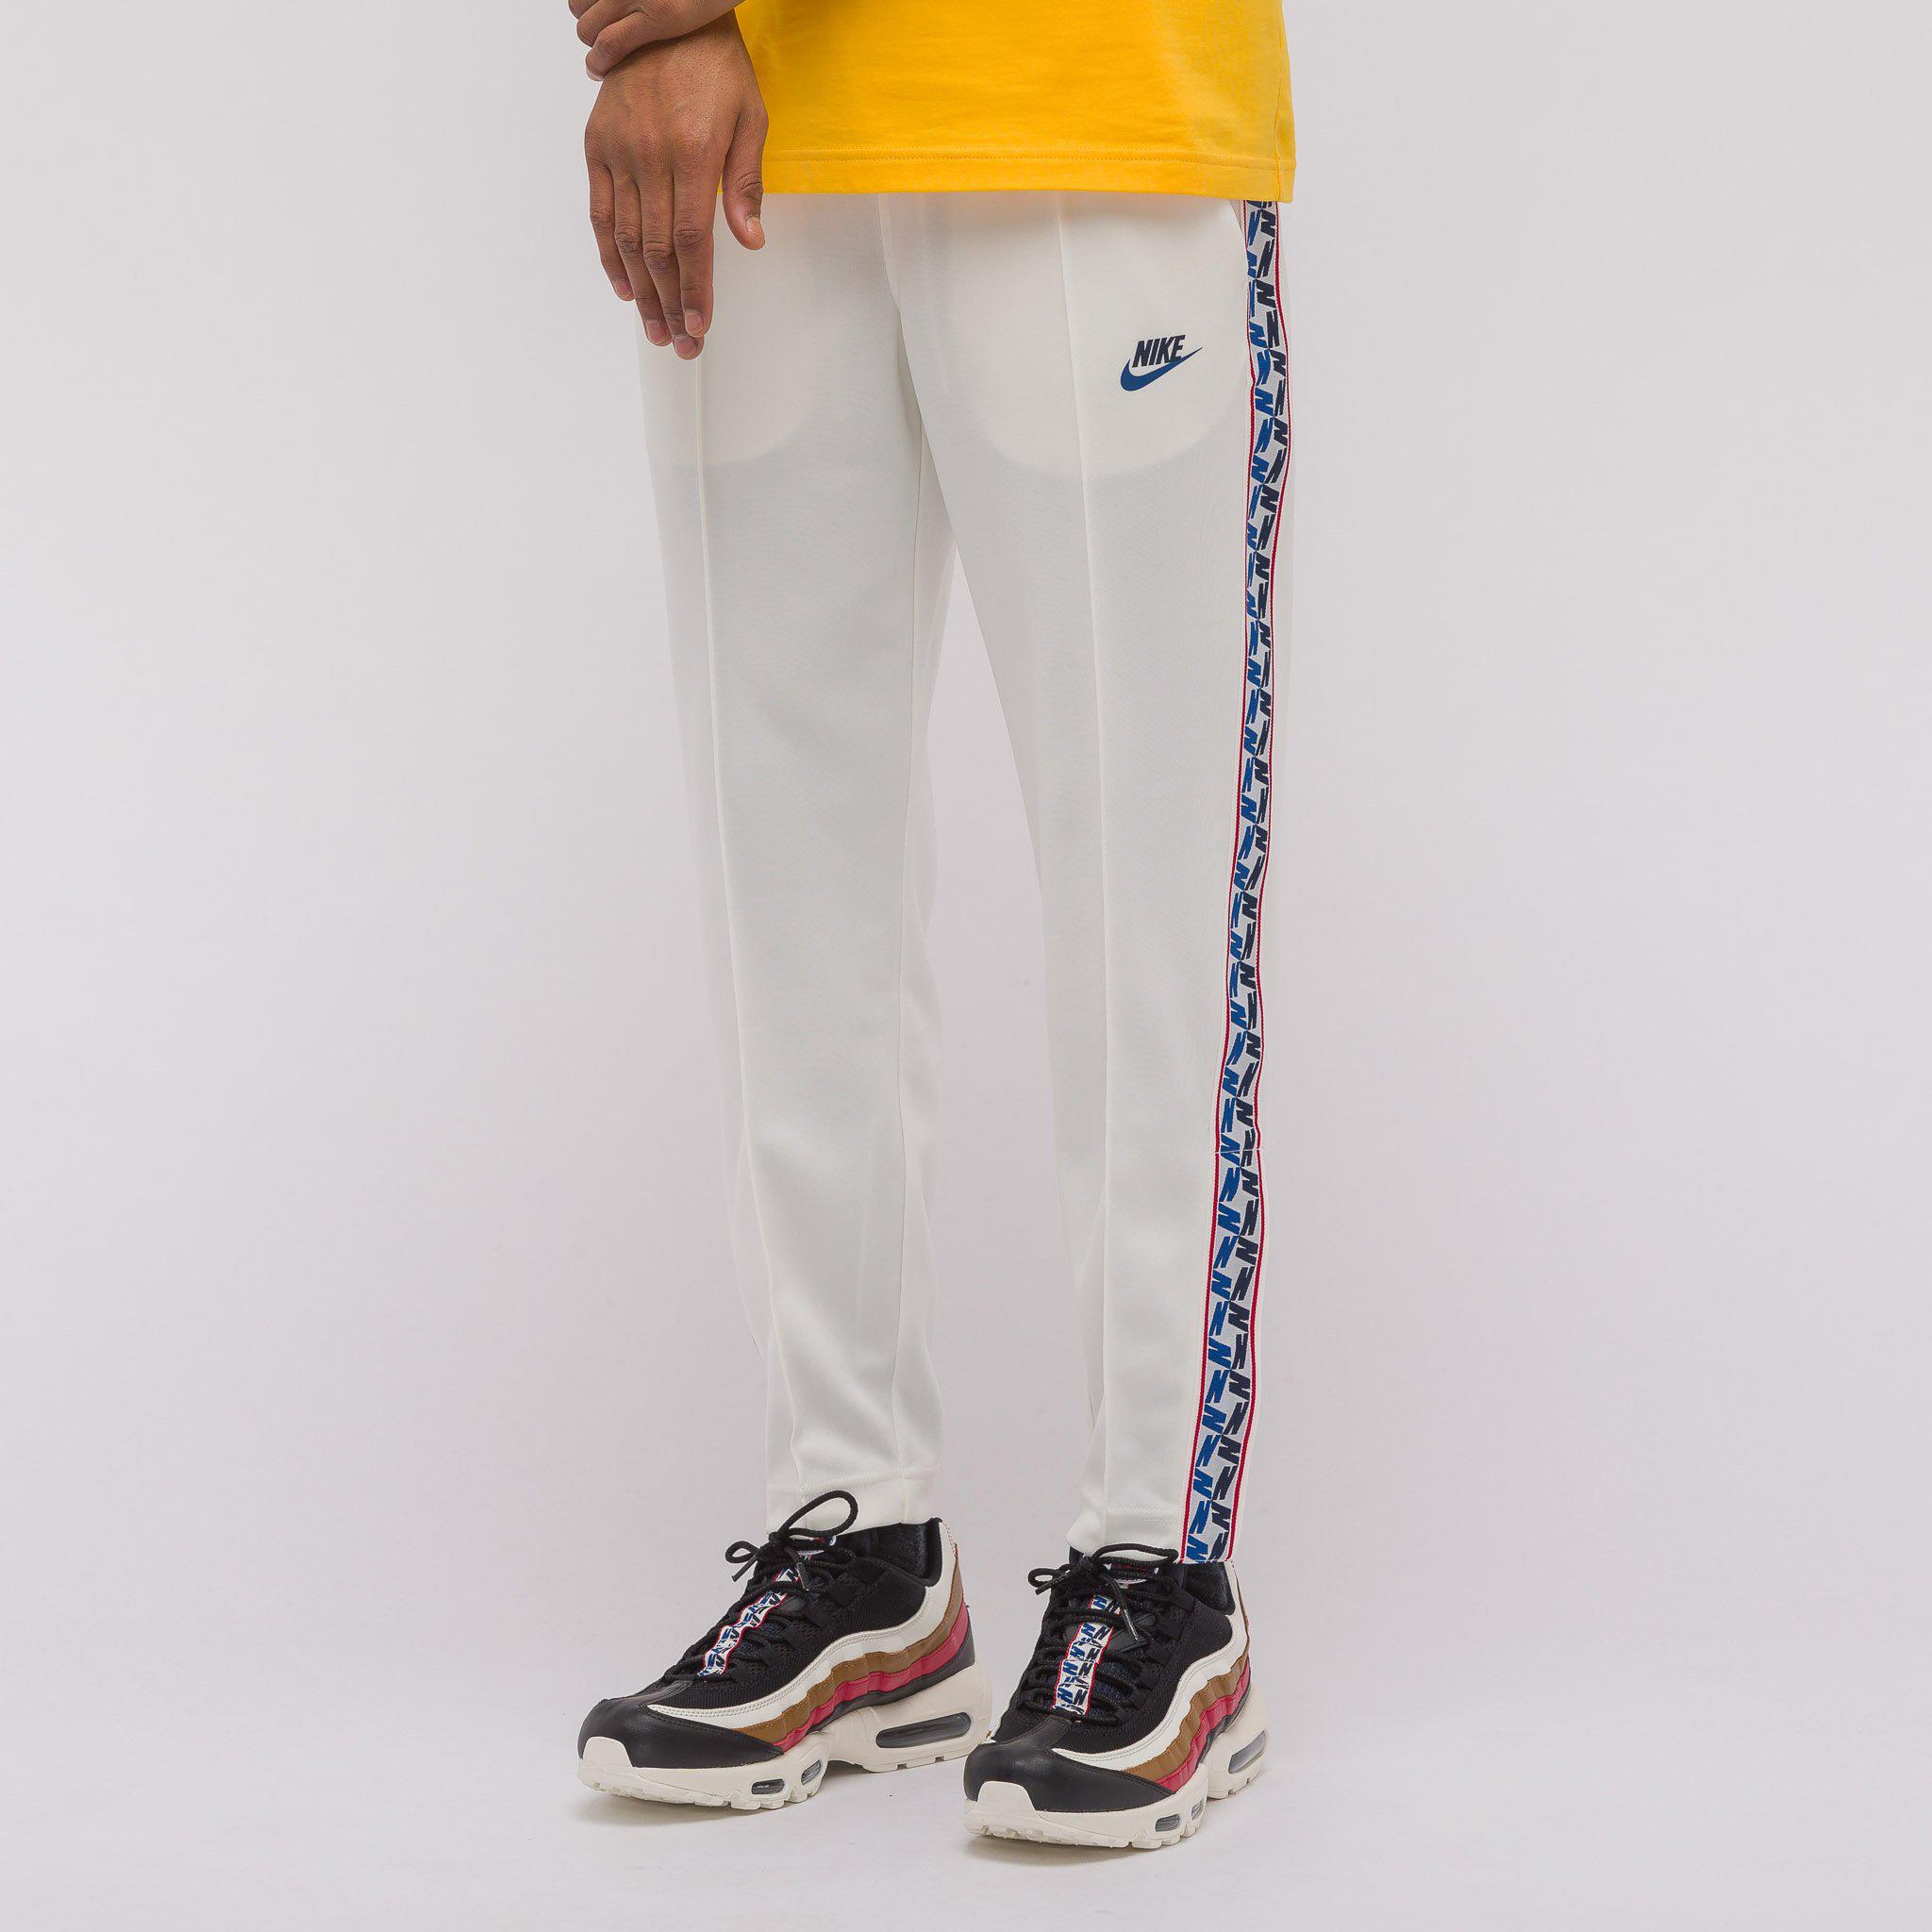 nike taped poly track pant